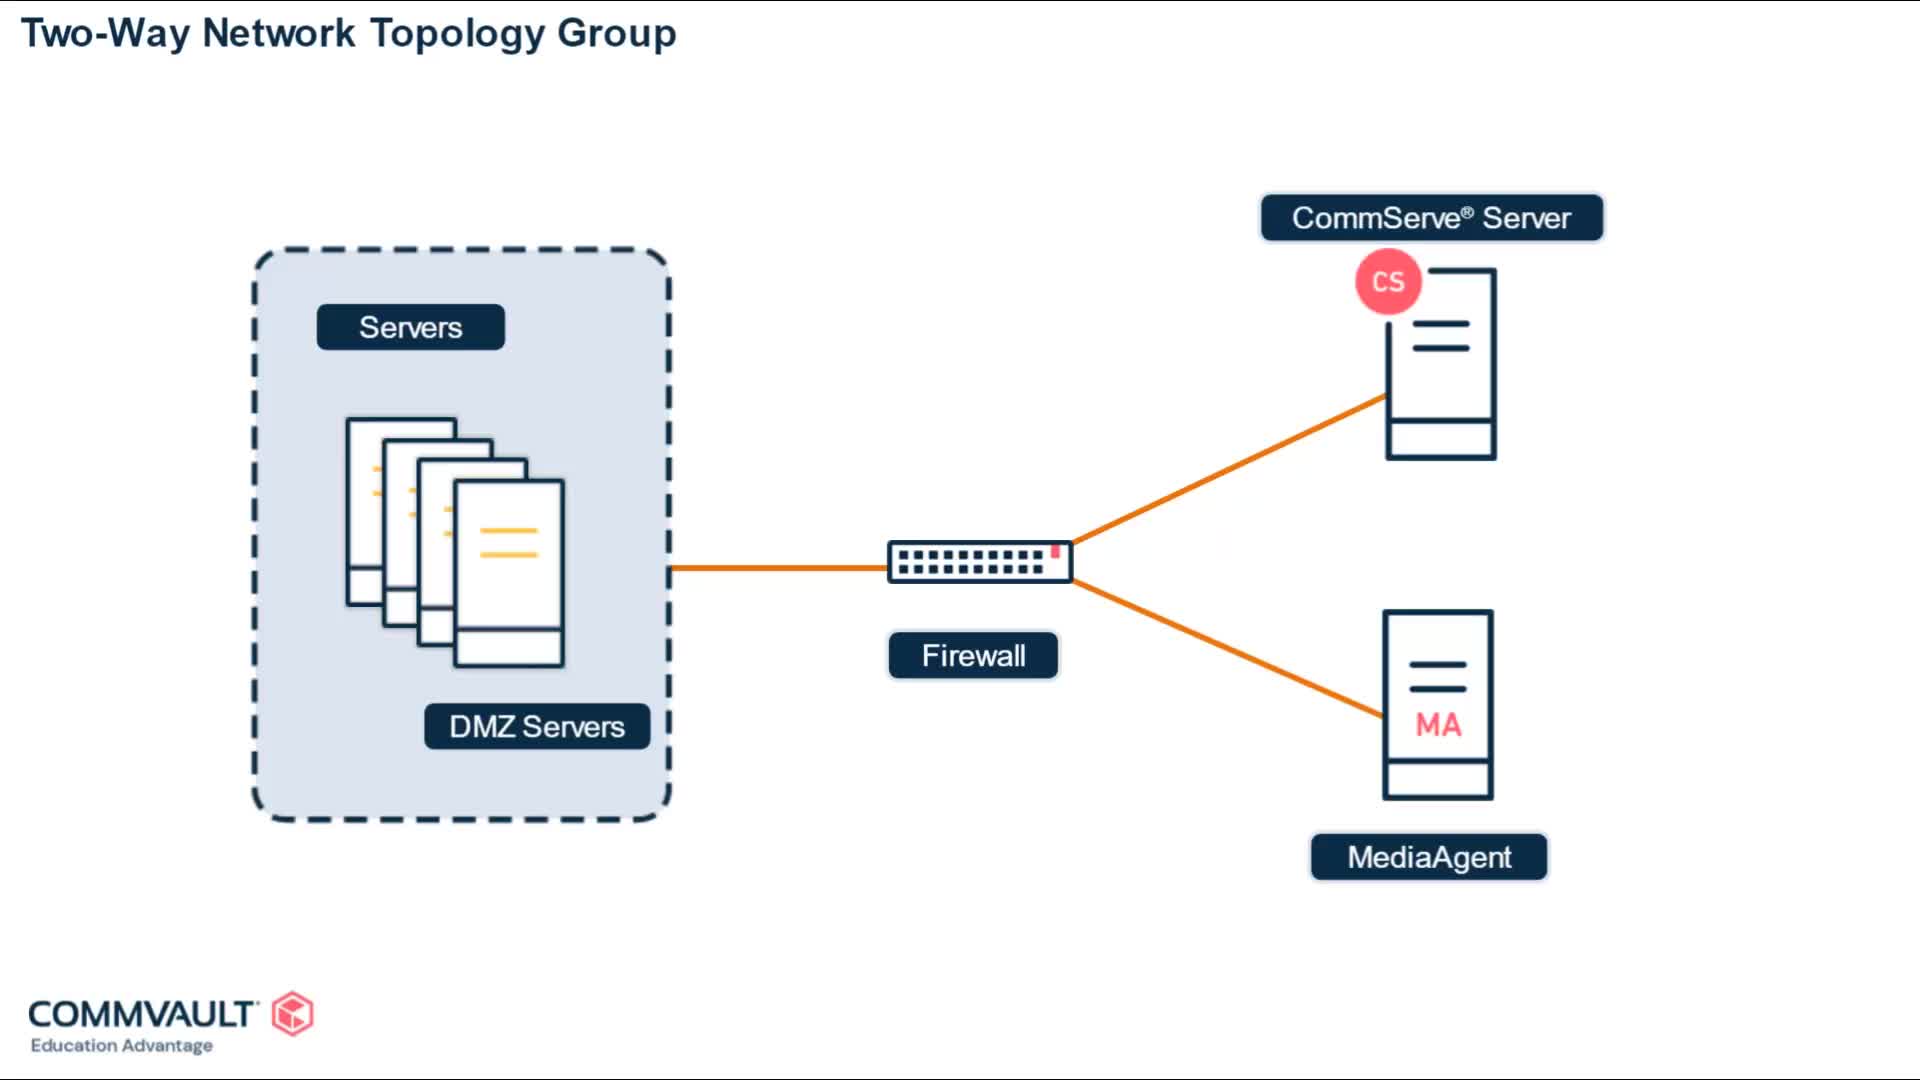 3.3.3.Network Topology Groups